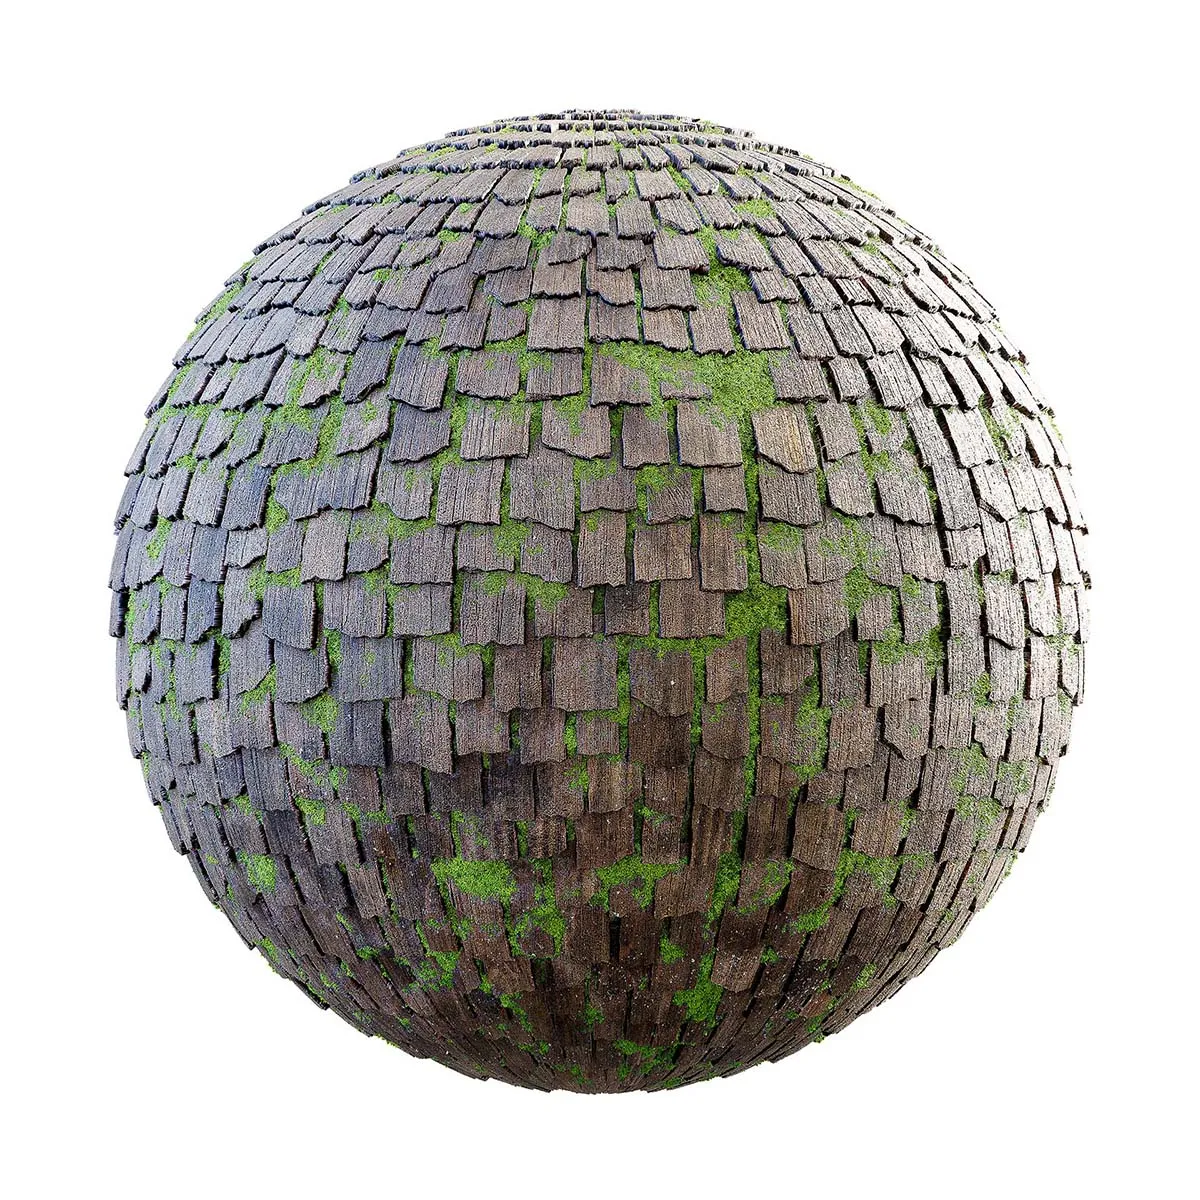 PBR Textures Volume 29 – Medieval – 4K – 8K – wooden_roof_tile_with_moss_29_31